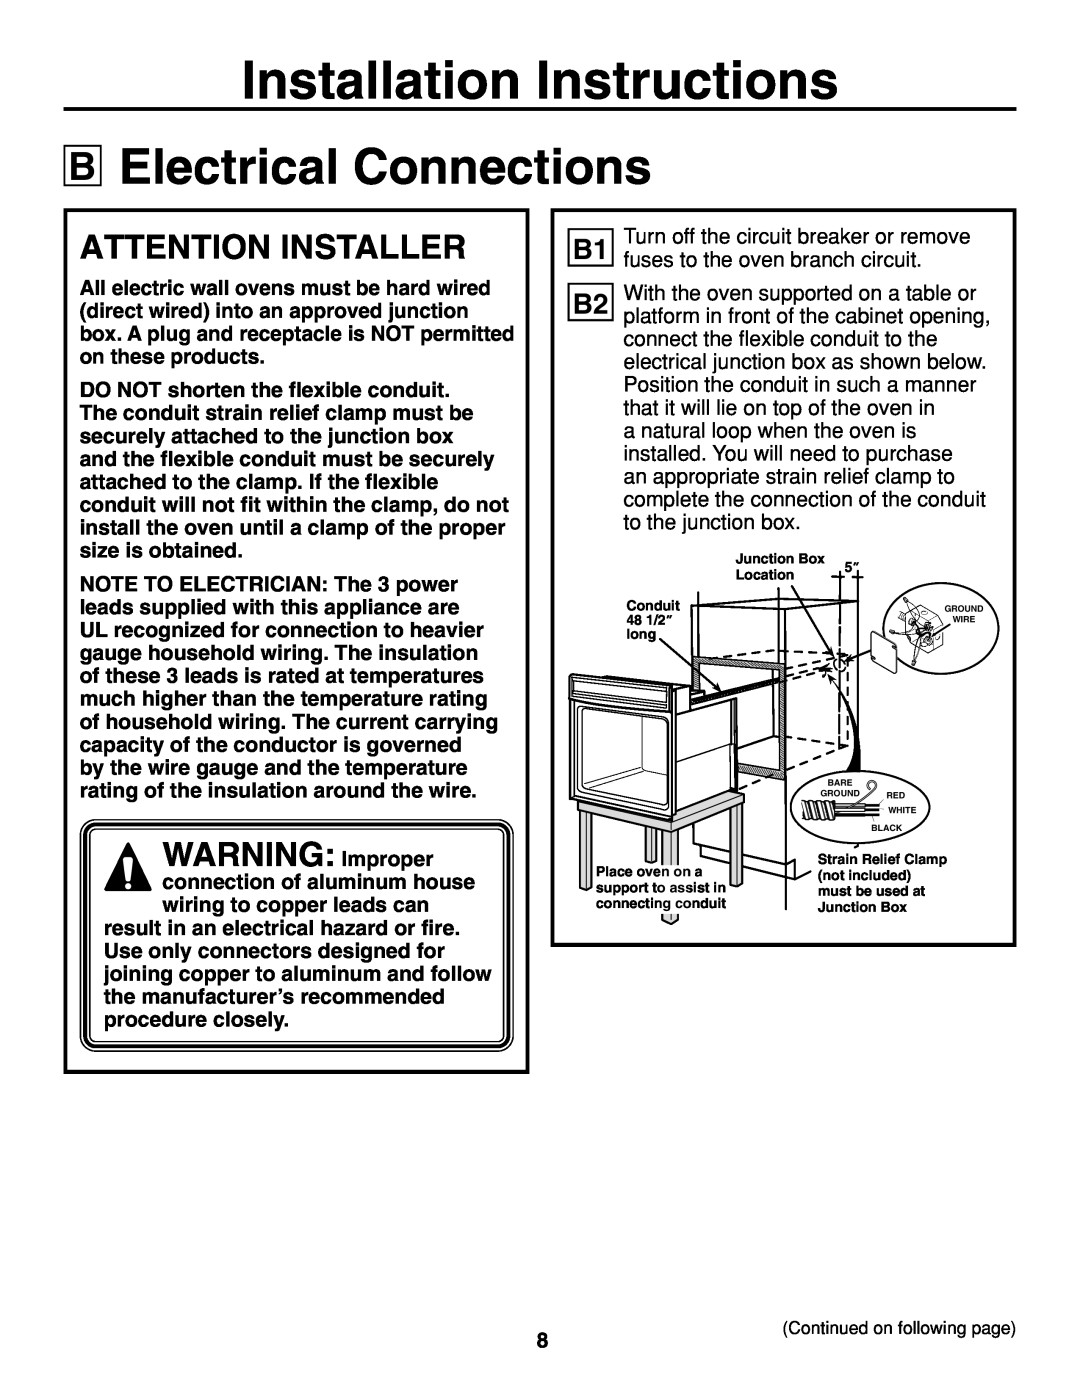 GE JTP20 installation instructions Electrical Connections, WARNING Improper, Installation Instructions, Attention Installer 